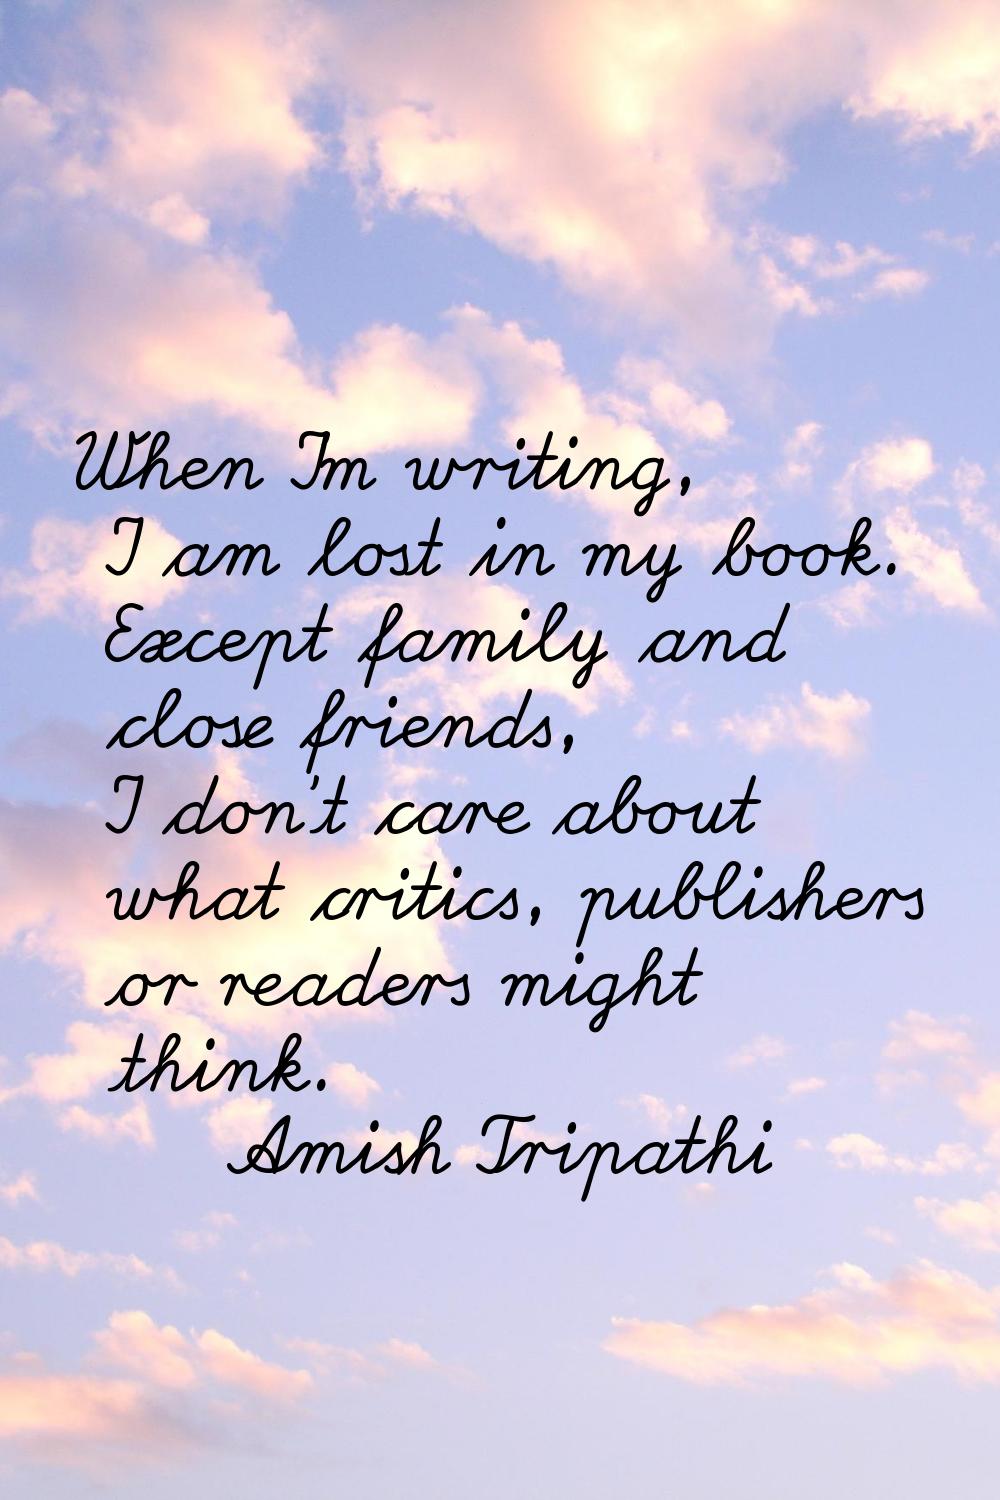 When I'm writing, I am lost in my book. Except family and close friends, I don't care about what cr